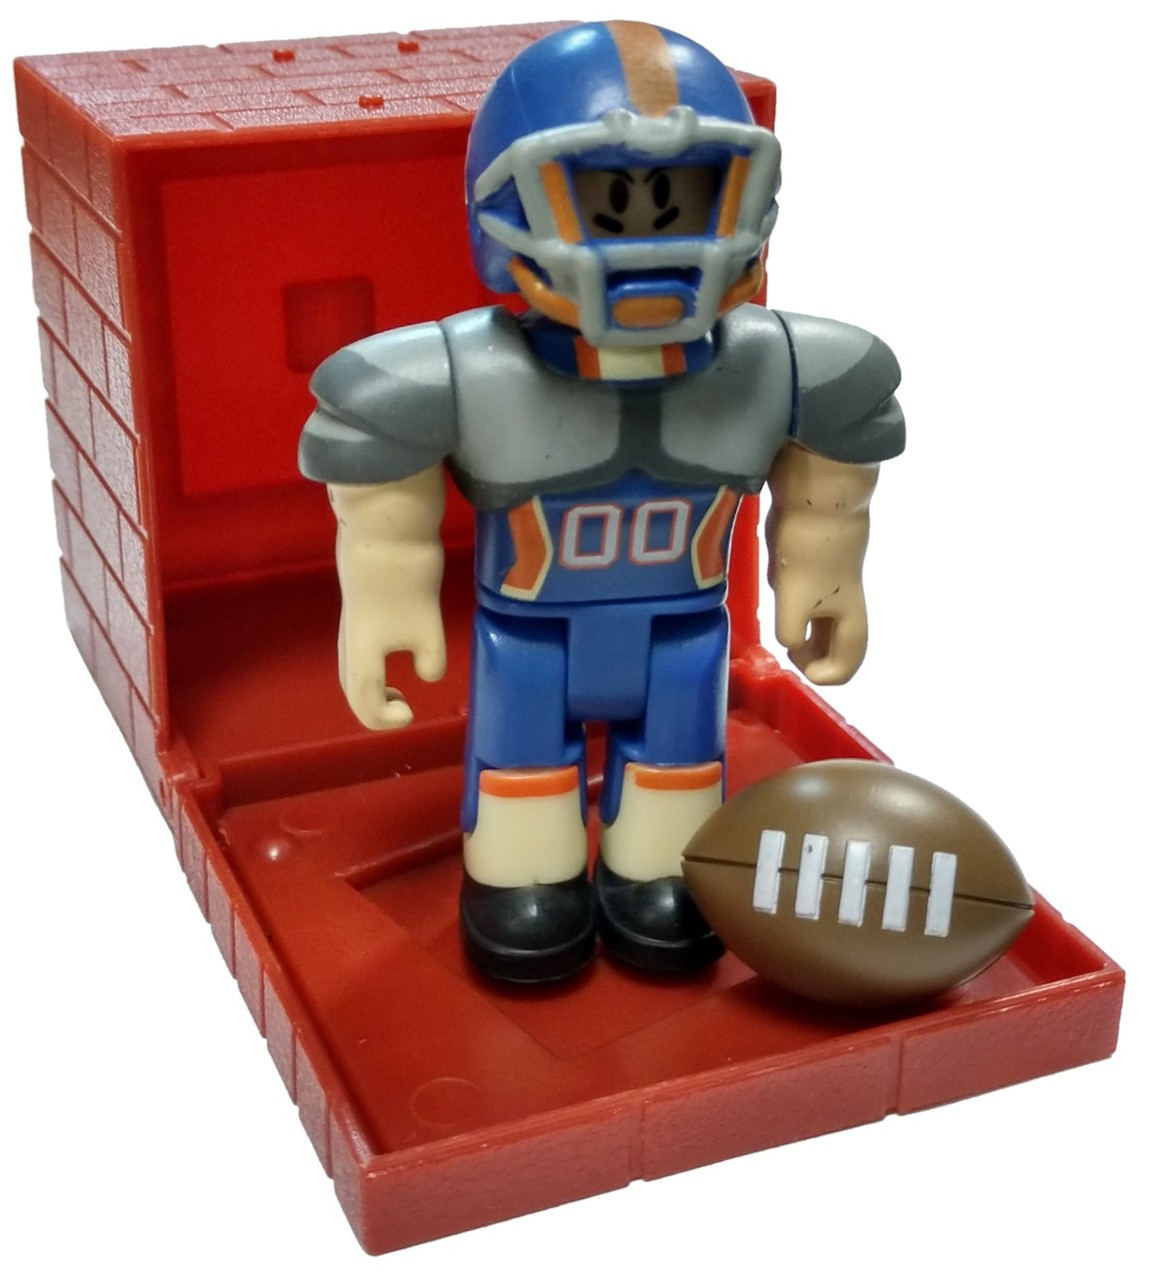 Roblox Red Series 4 Roblox High School Quarterback 3 Mini Figure With Red Cube And Online Code Loose Jazwares Toywiz - roblox red knight helmet